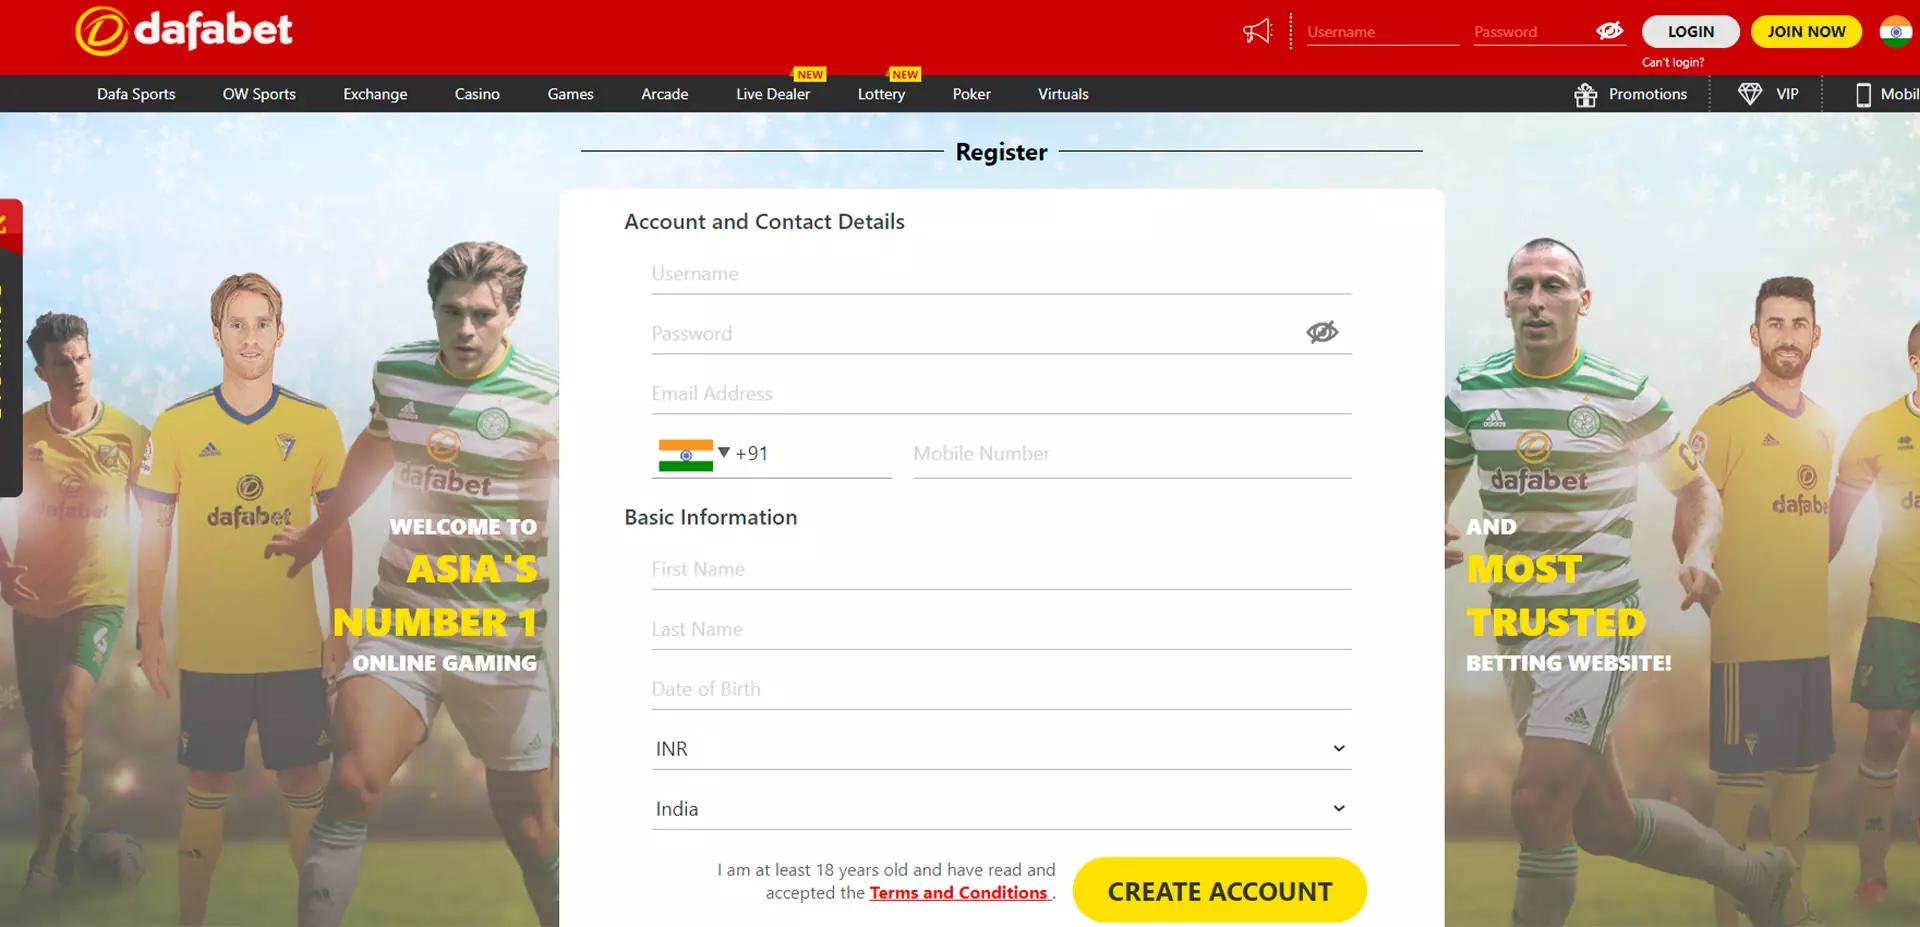 Provide only trustworthy information while registerinh at Dafabet.